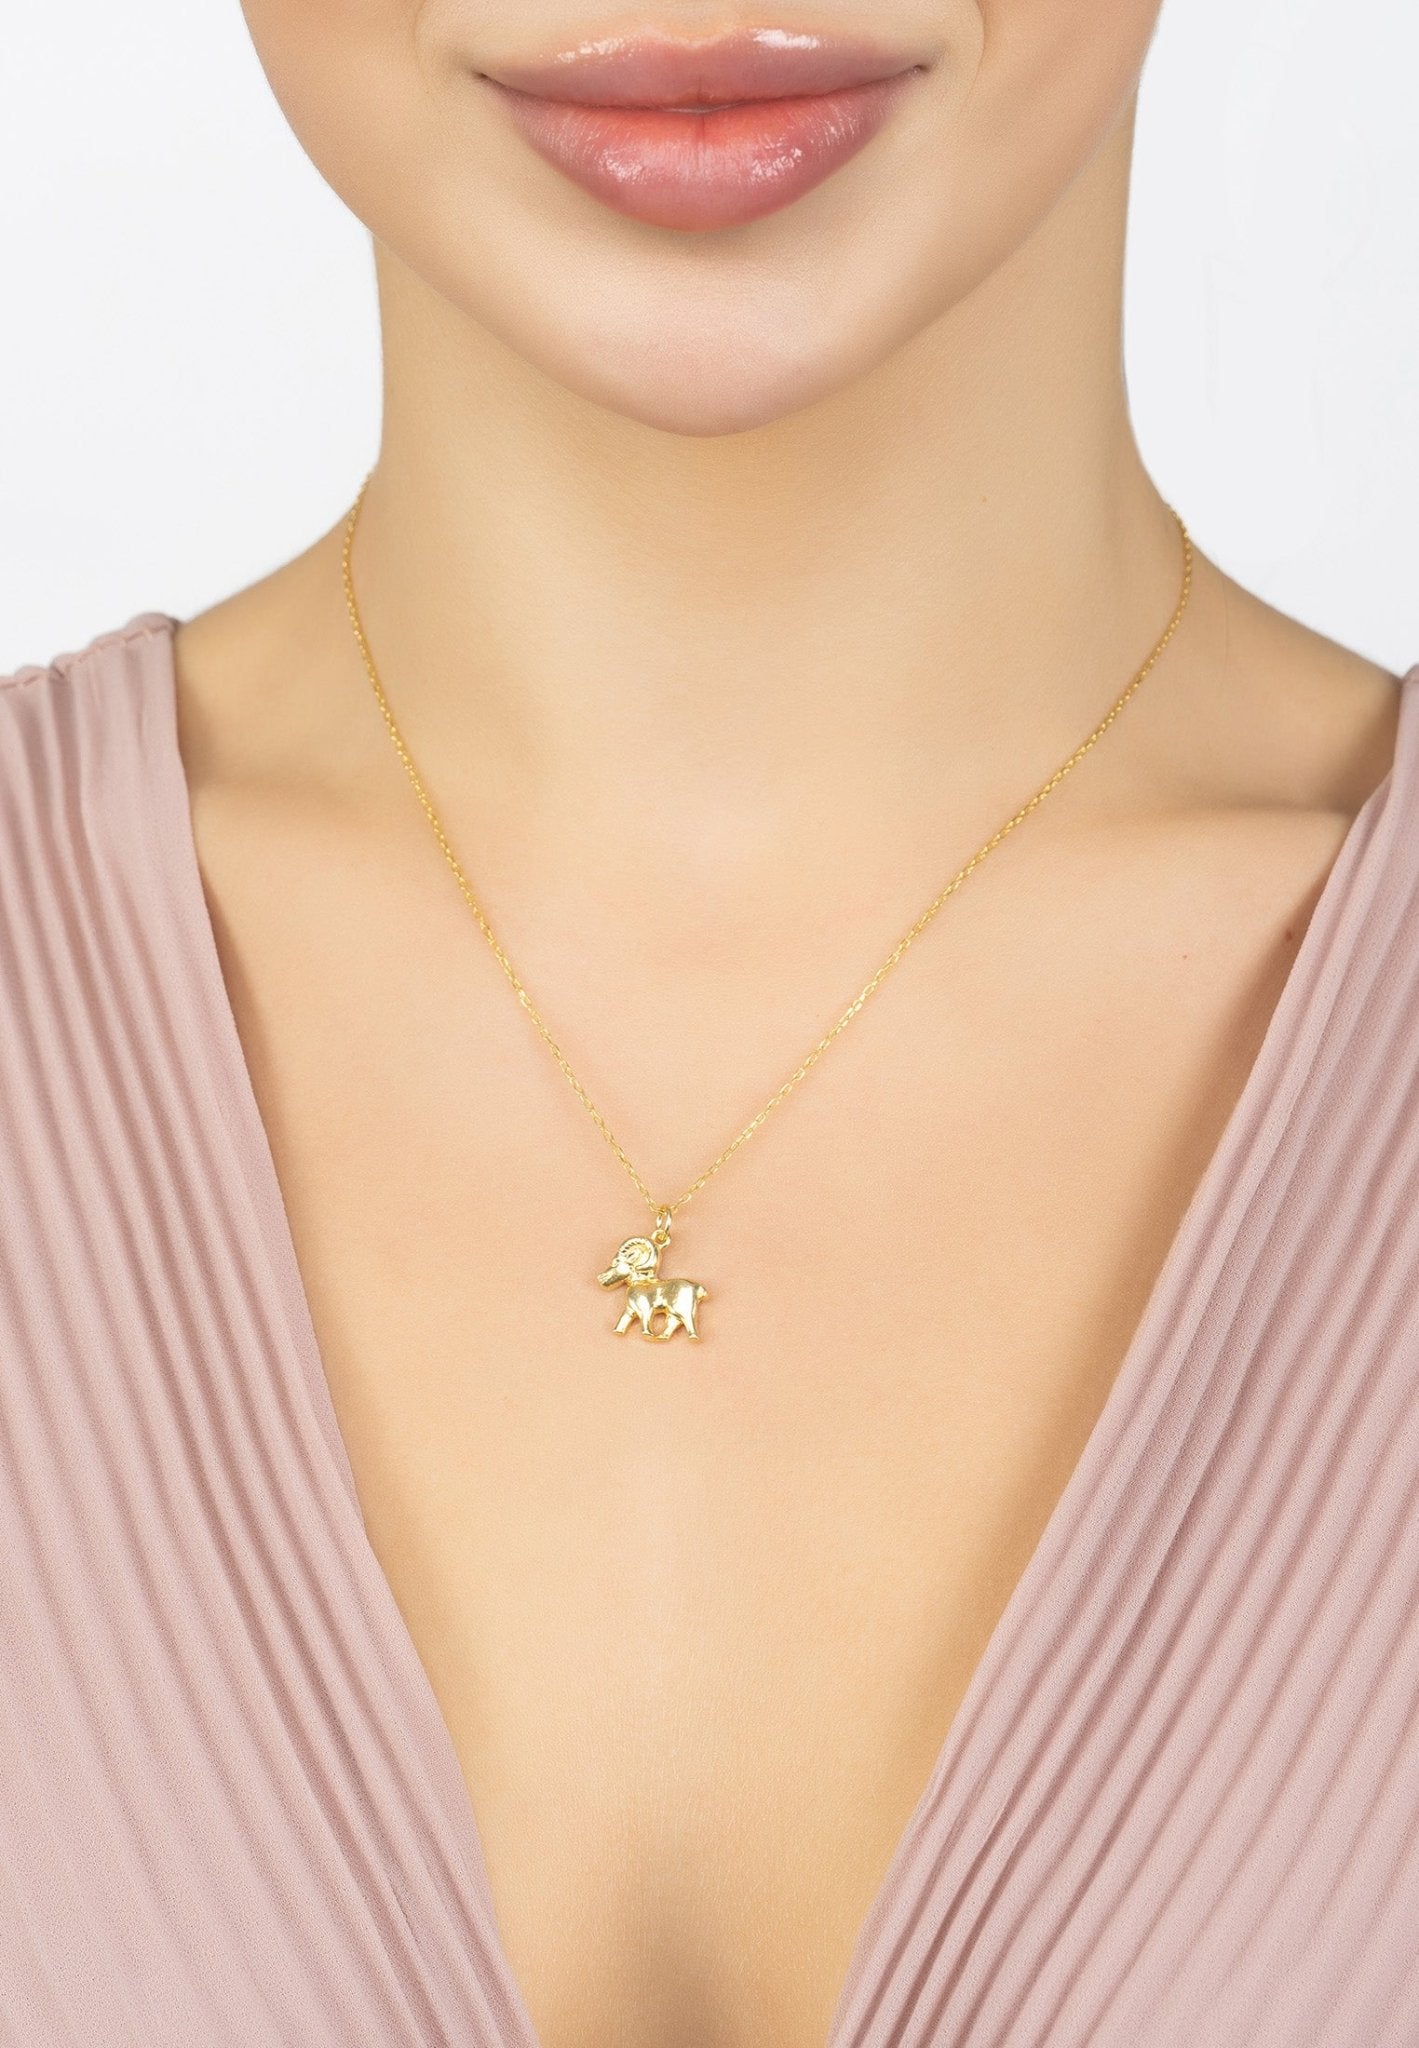 Zodiac Star Sign Necklace Gold Aries - LATELITA Necklaces